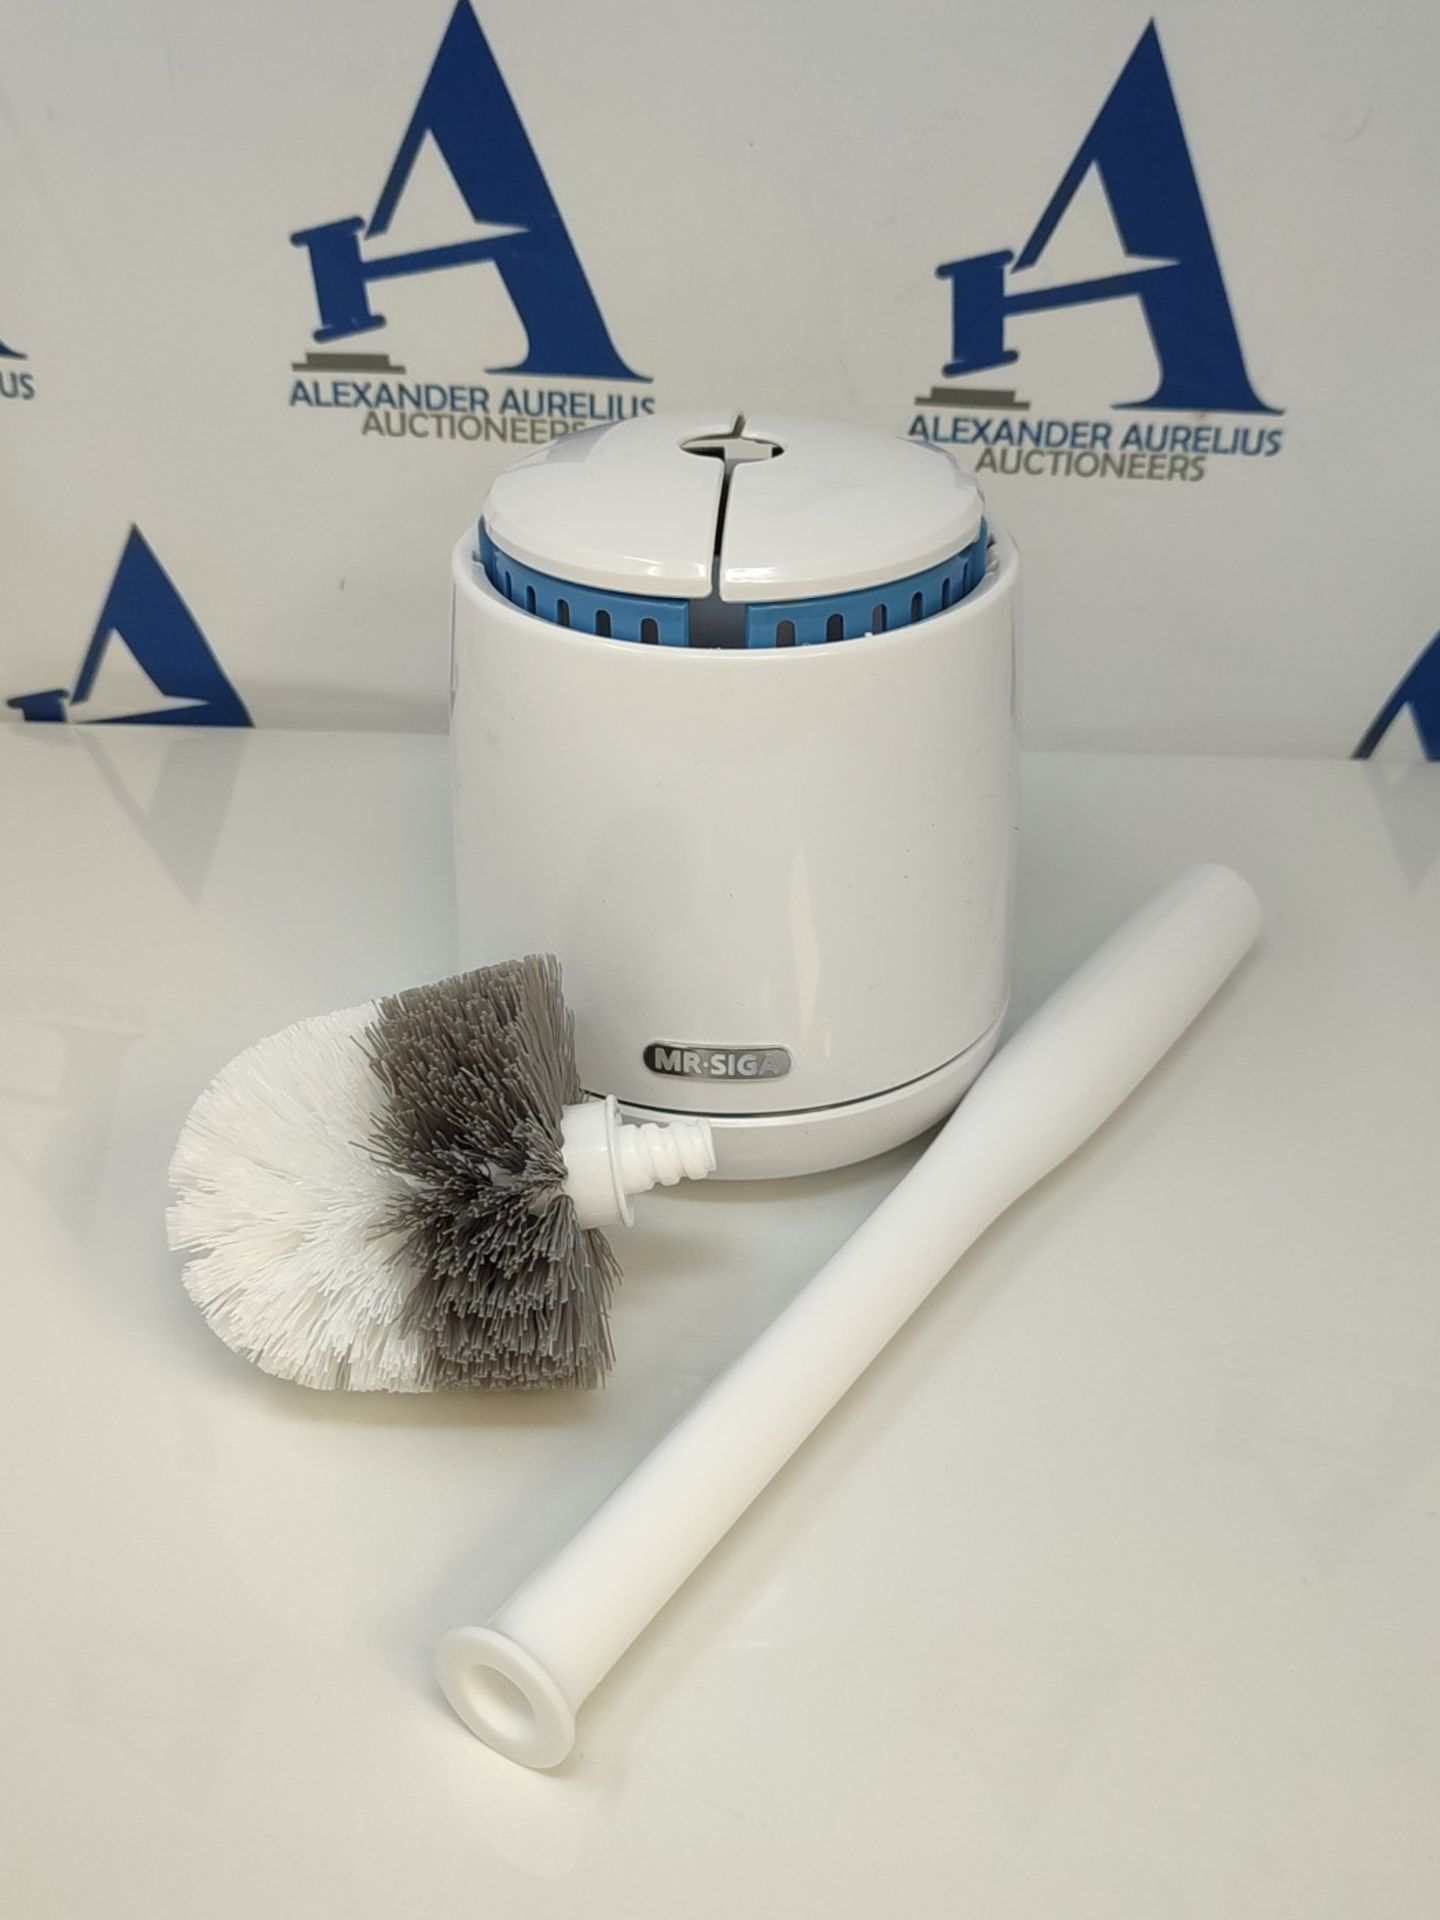 MR.SIGA Toilet Bowl Brush and Holder, Premium Quality, with Solid Handle and Durable B - Bild 2 aus 2